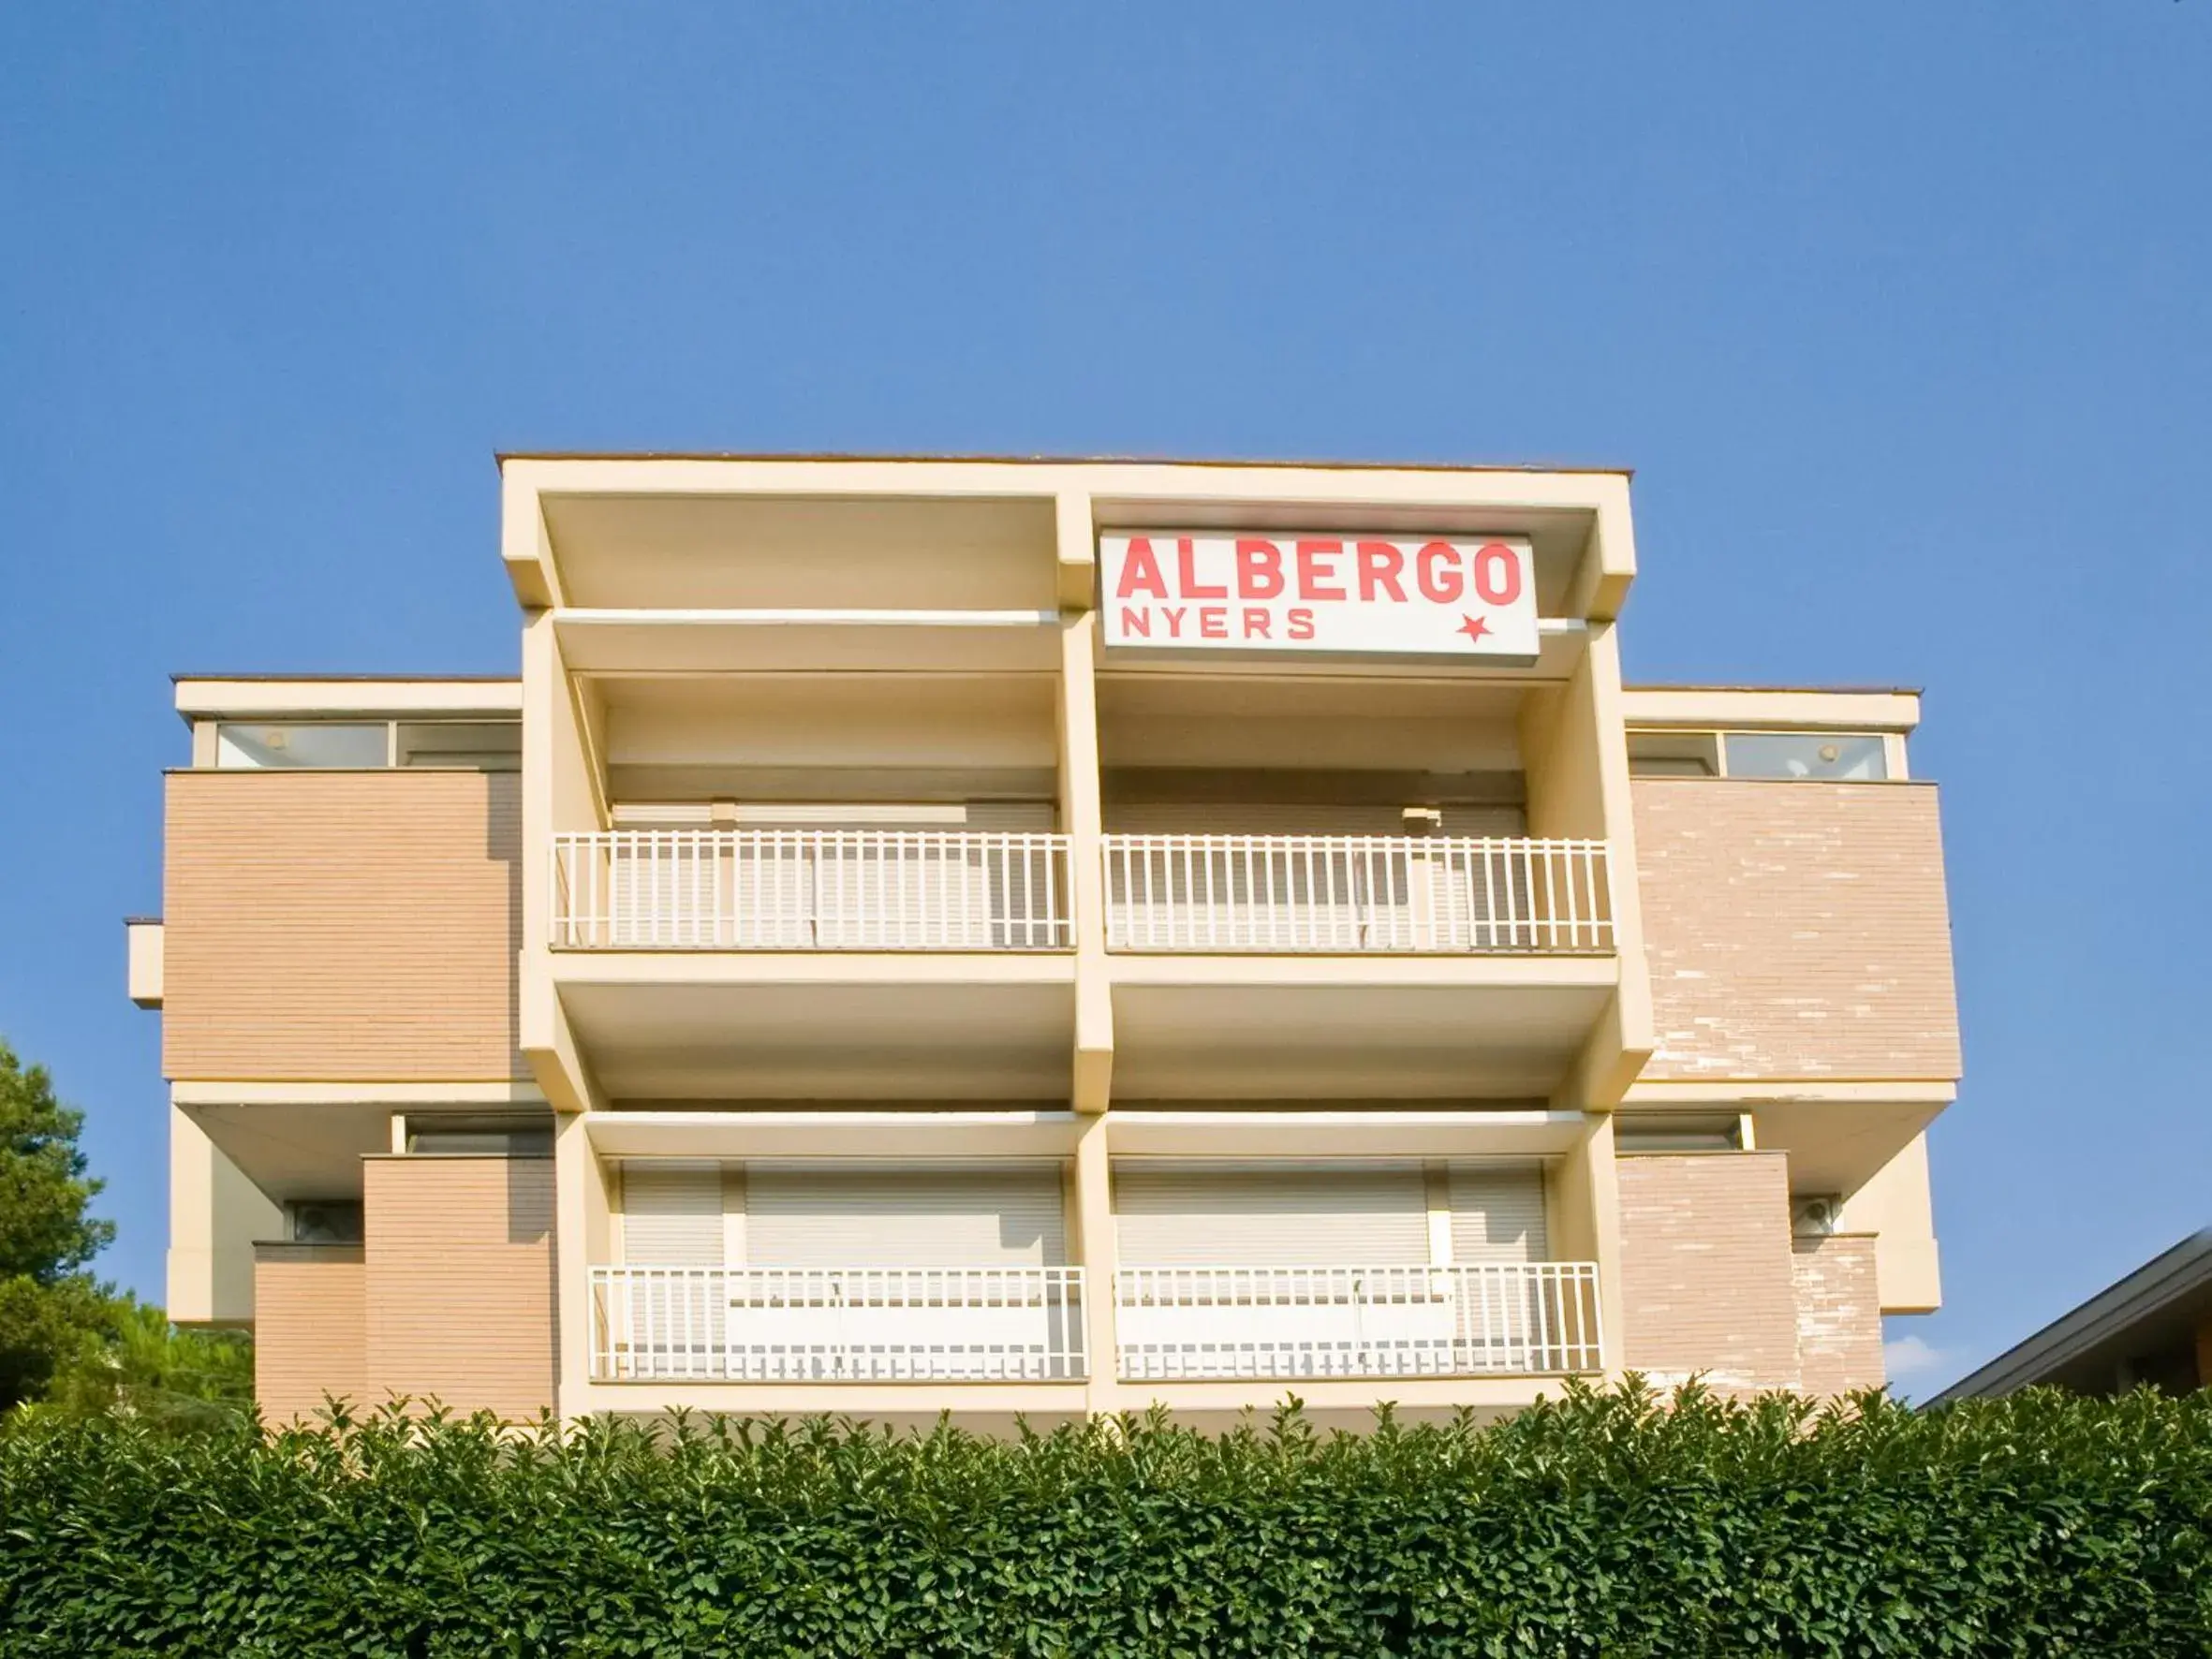 Property building in Albergo Nyers